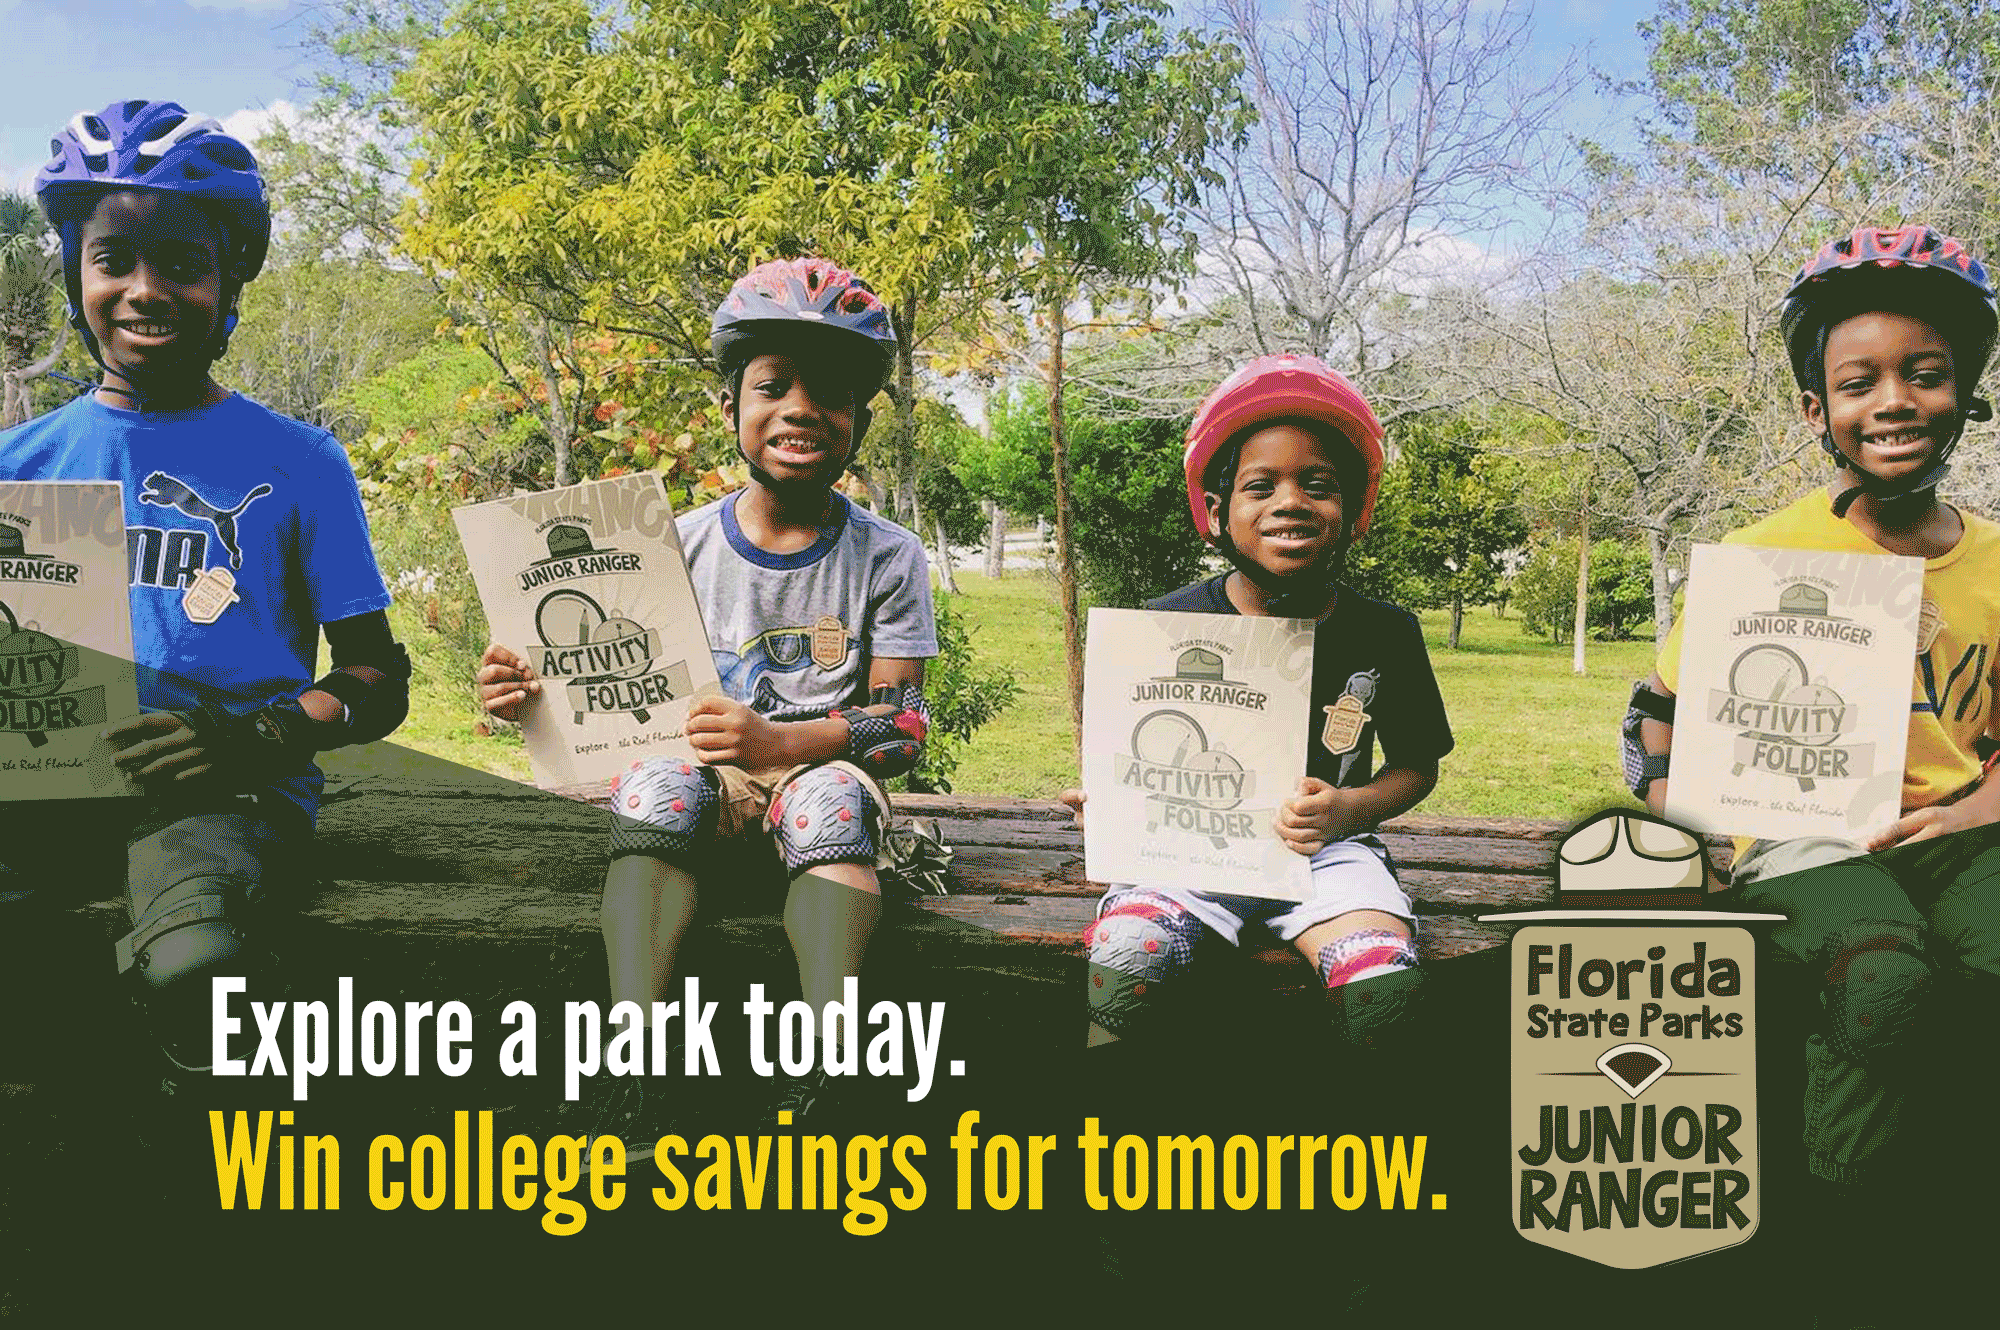 Explore a park today. Win college savings for tomorrow.